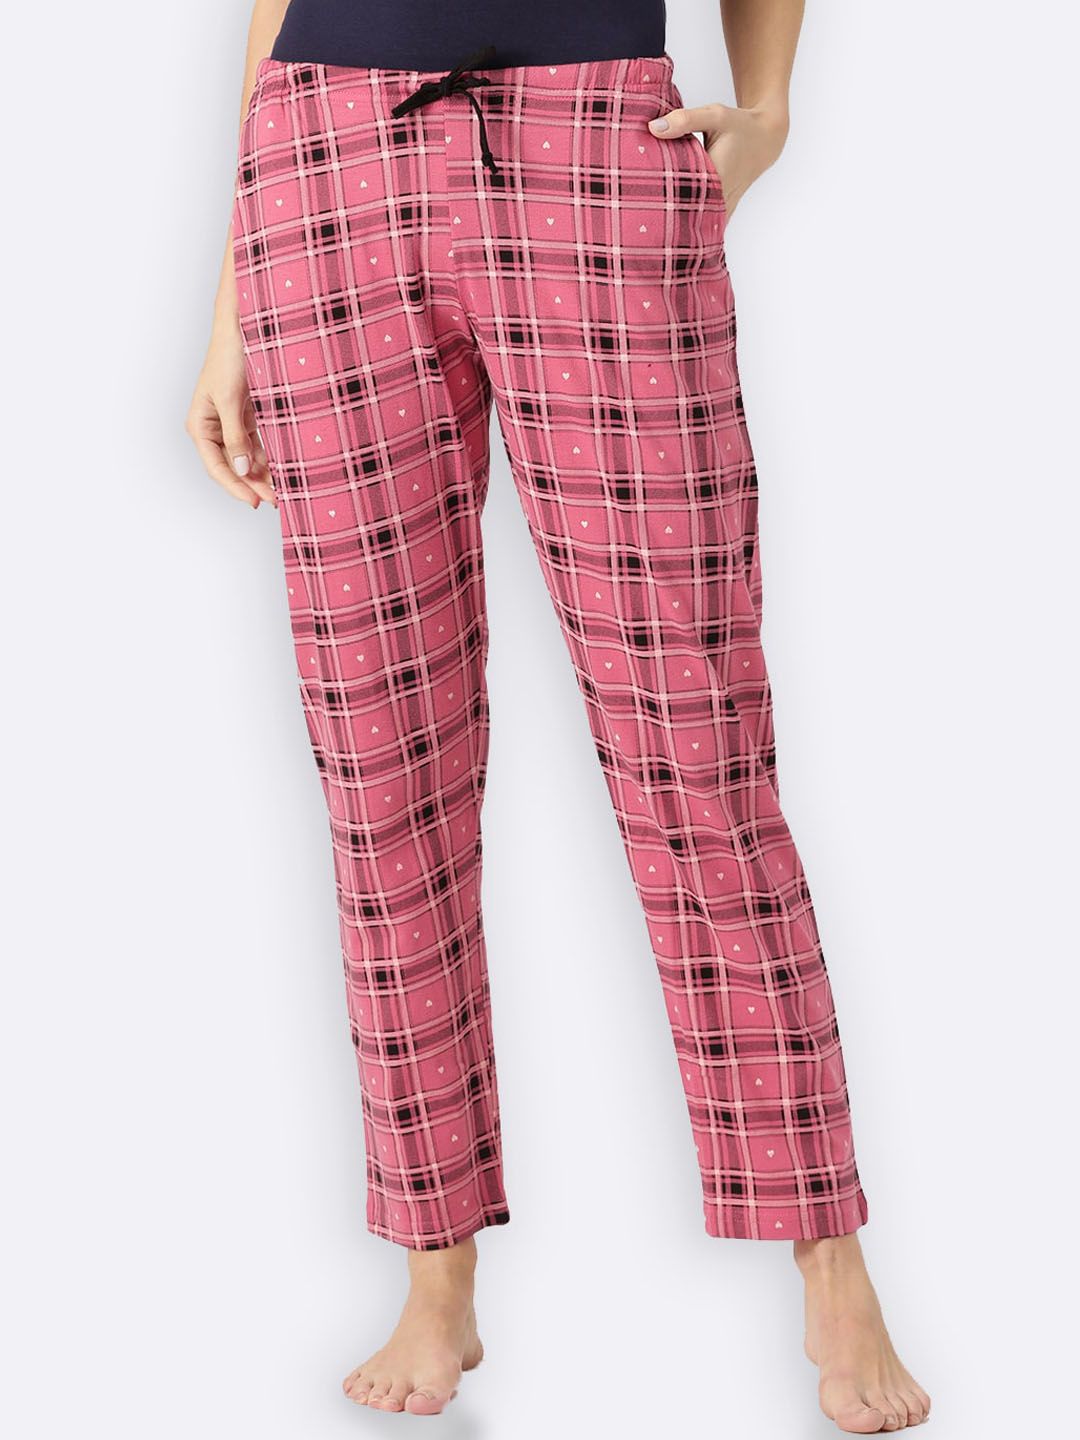 Kanvin Pink Checked Cotton Lounge Pants Price in India